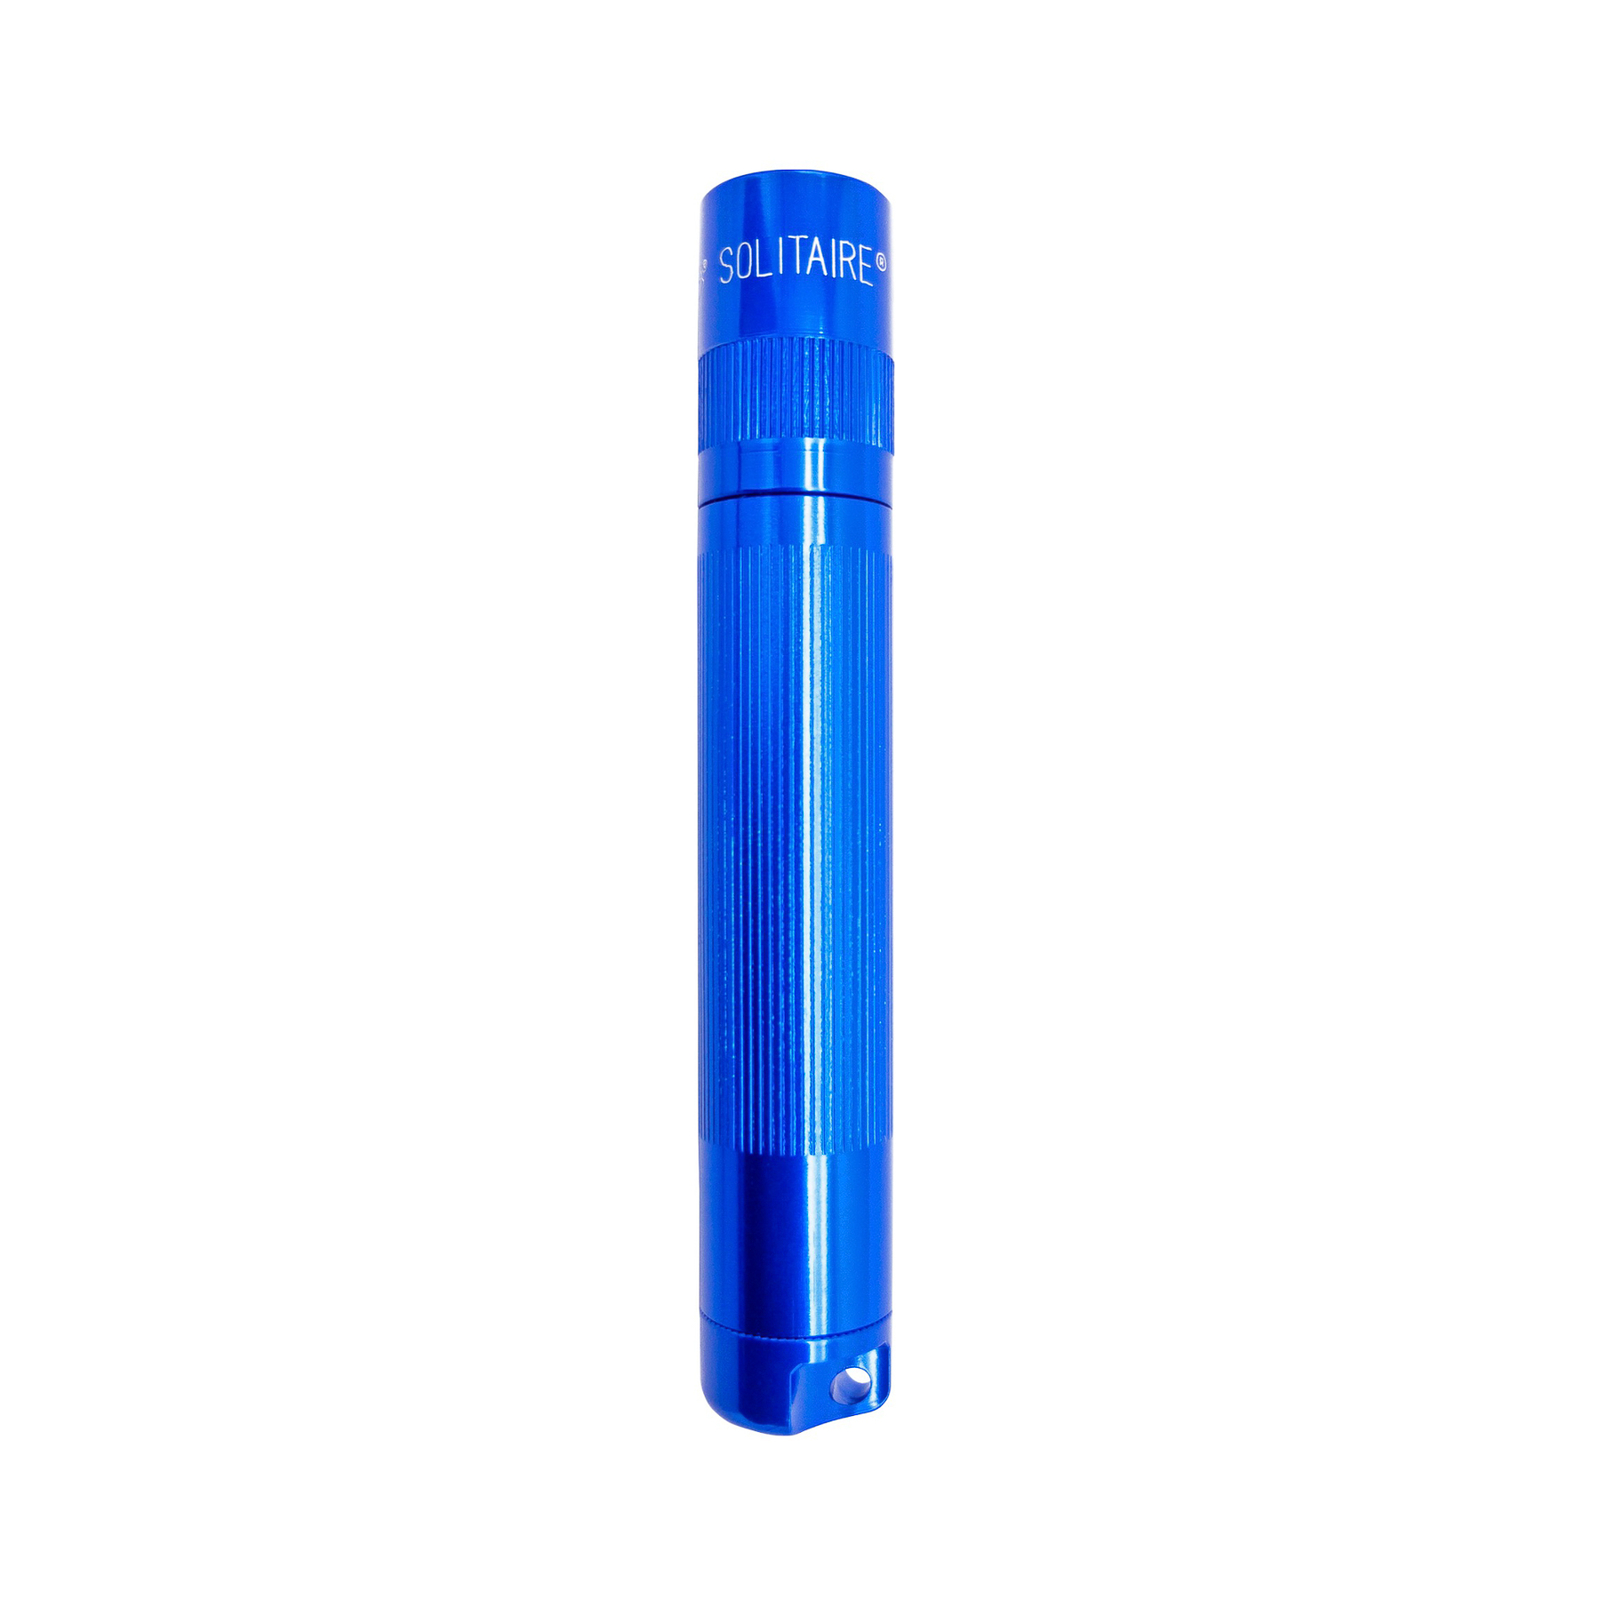 Maglite LED φακός Solitaire, 1-Cell AAA, κουτί, μπλε